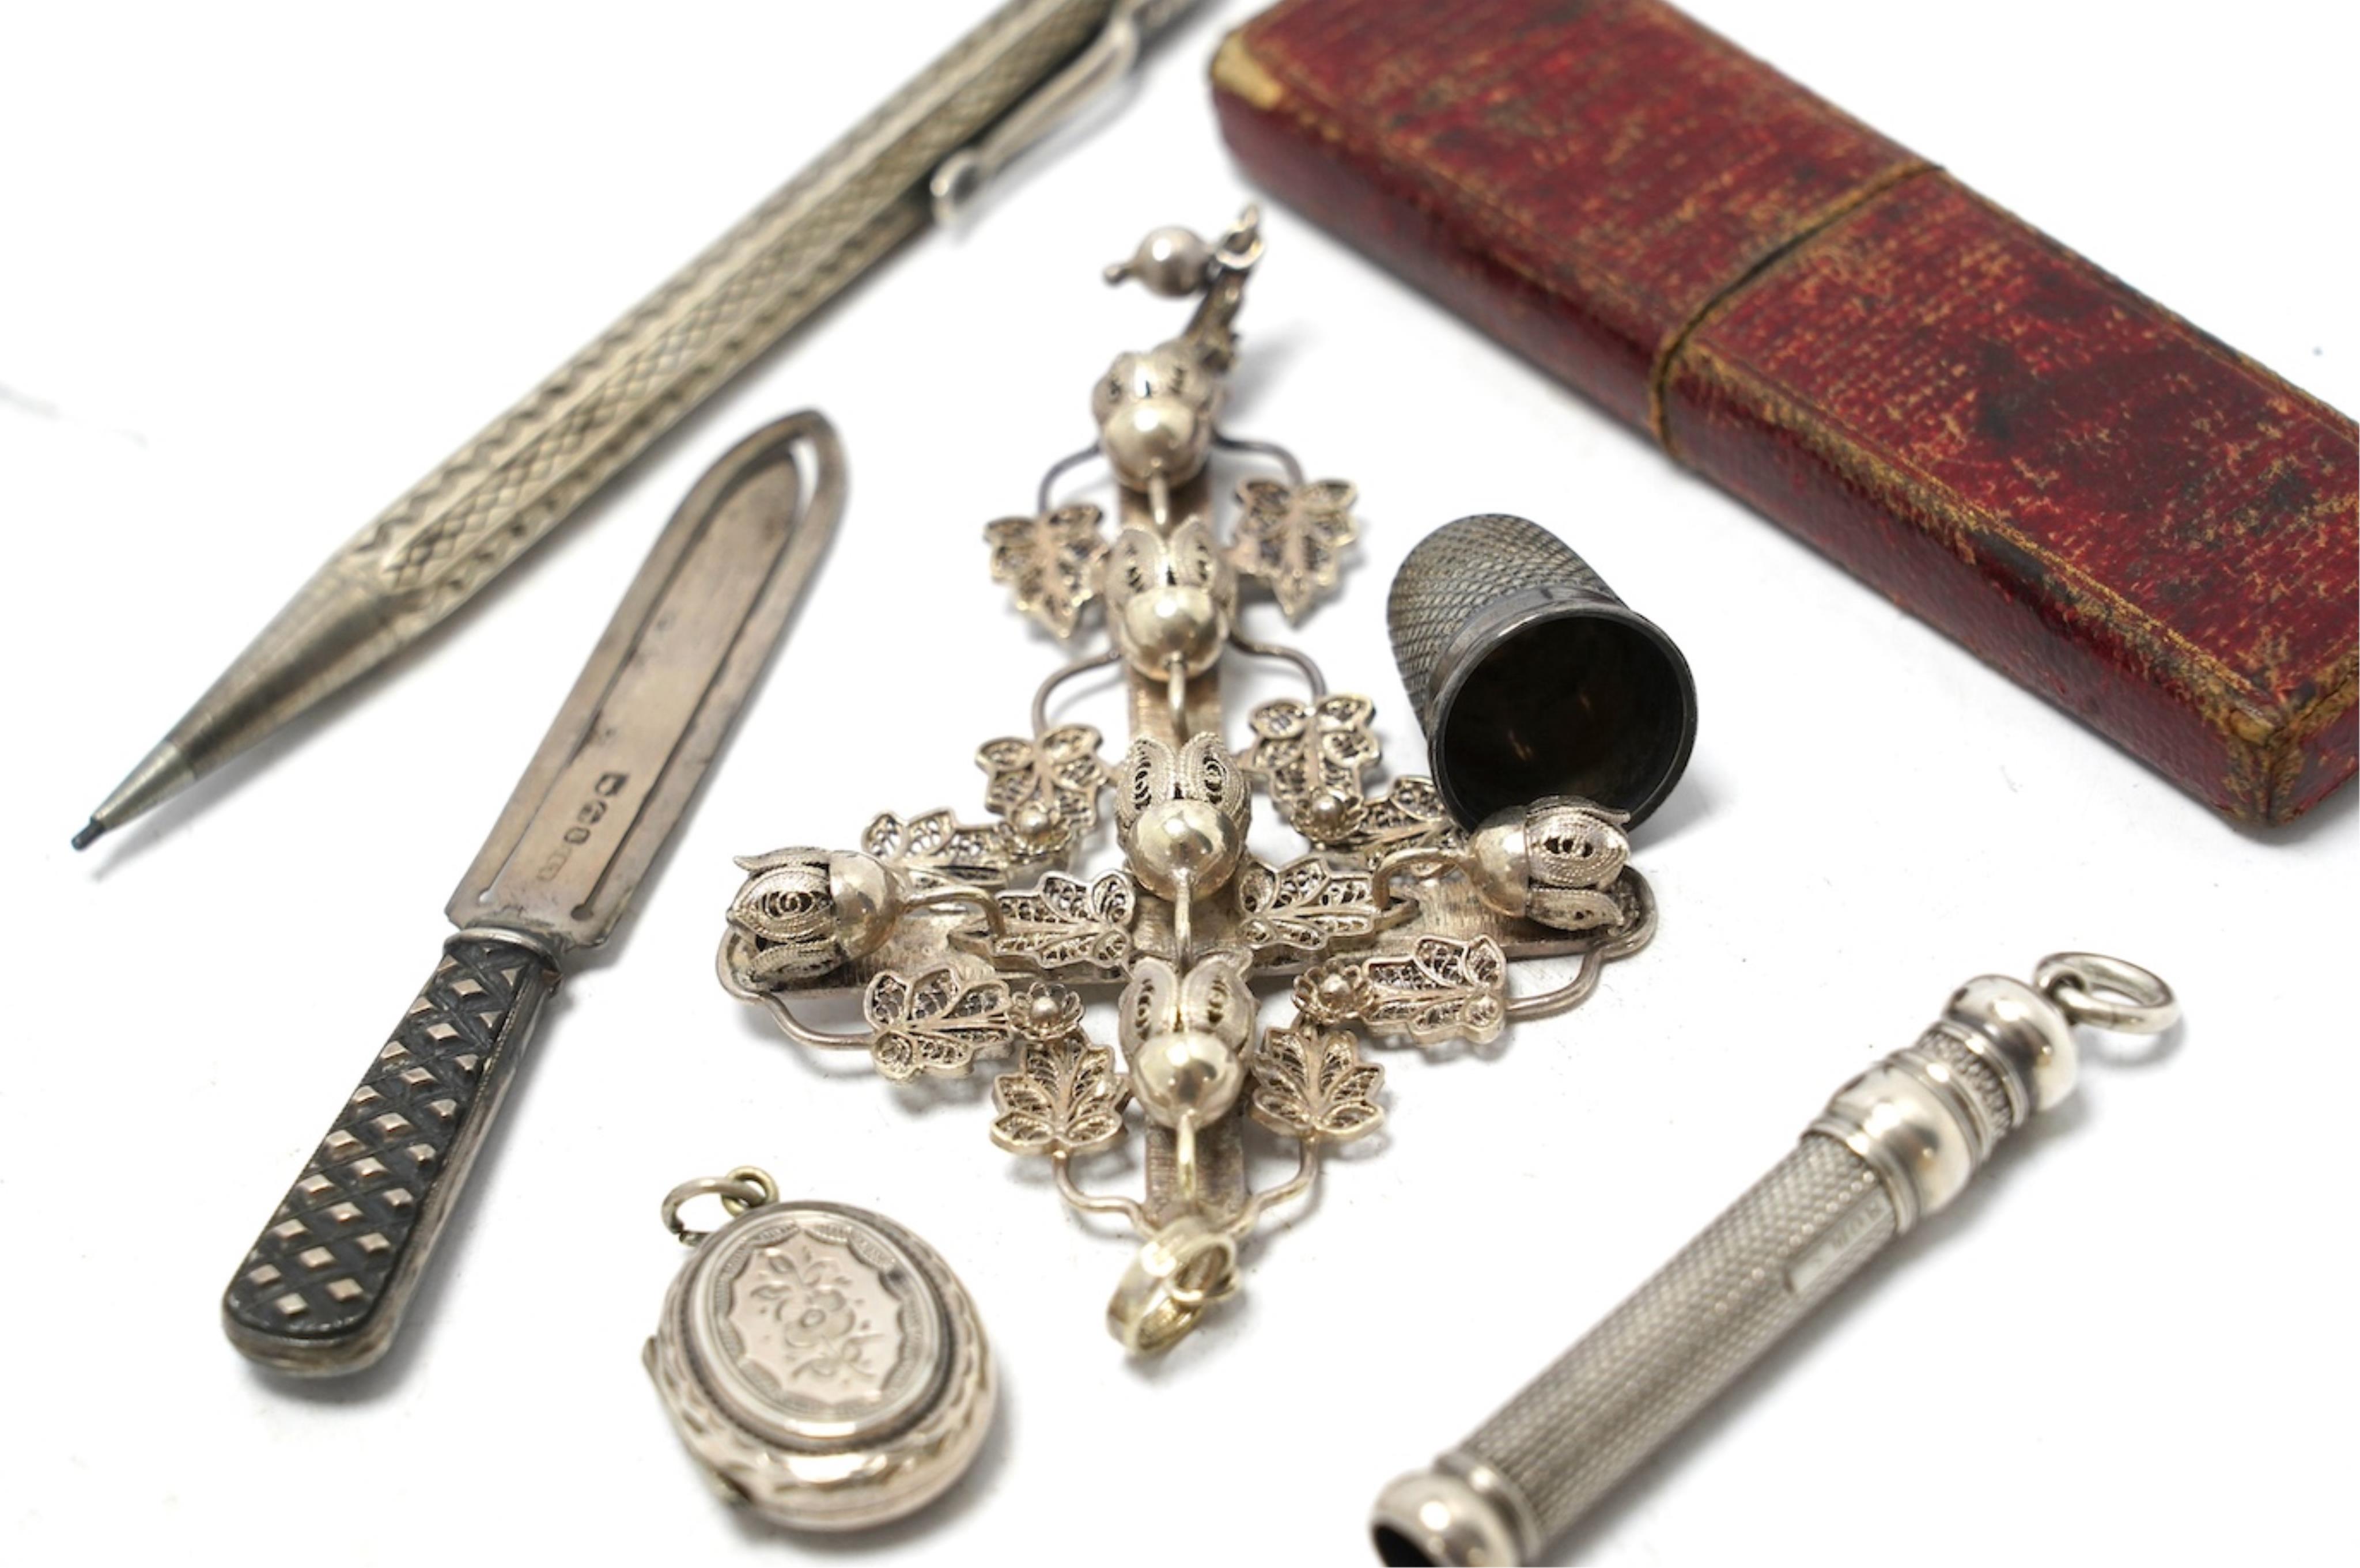 Small silver including a Victorian silver and mother of pearl fruit knife, a crucifix, a book mark, pencils, a thimble, etc. Condition - fair